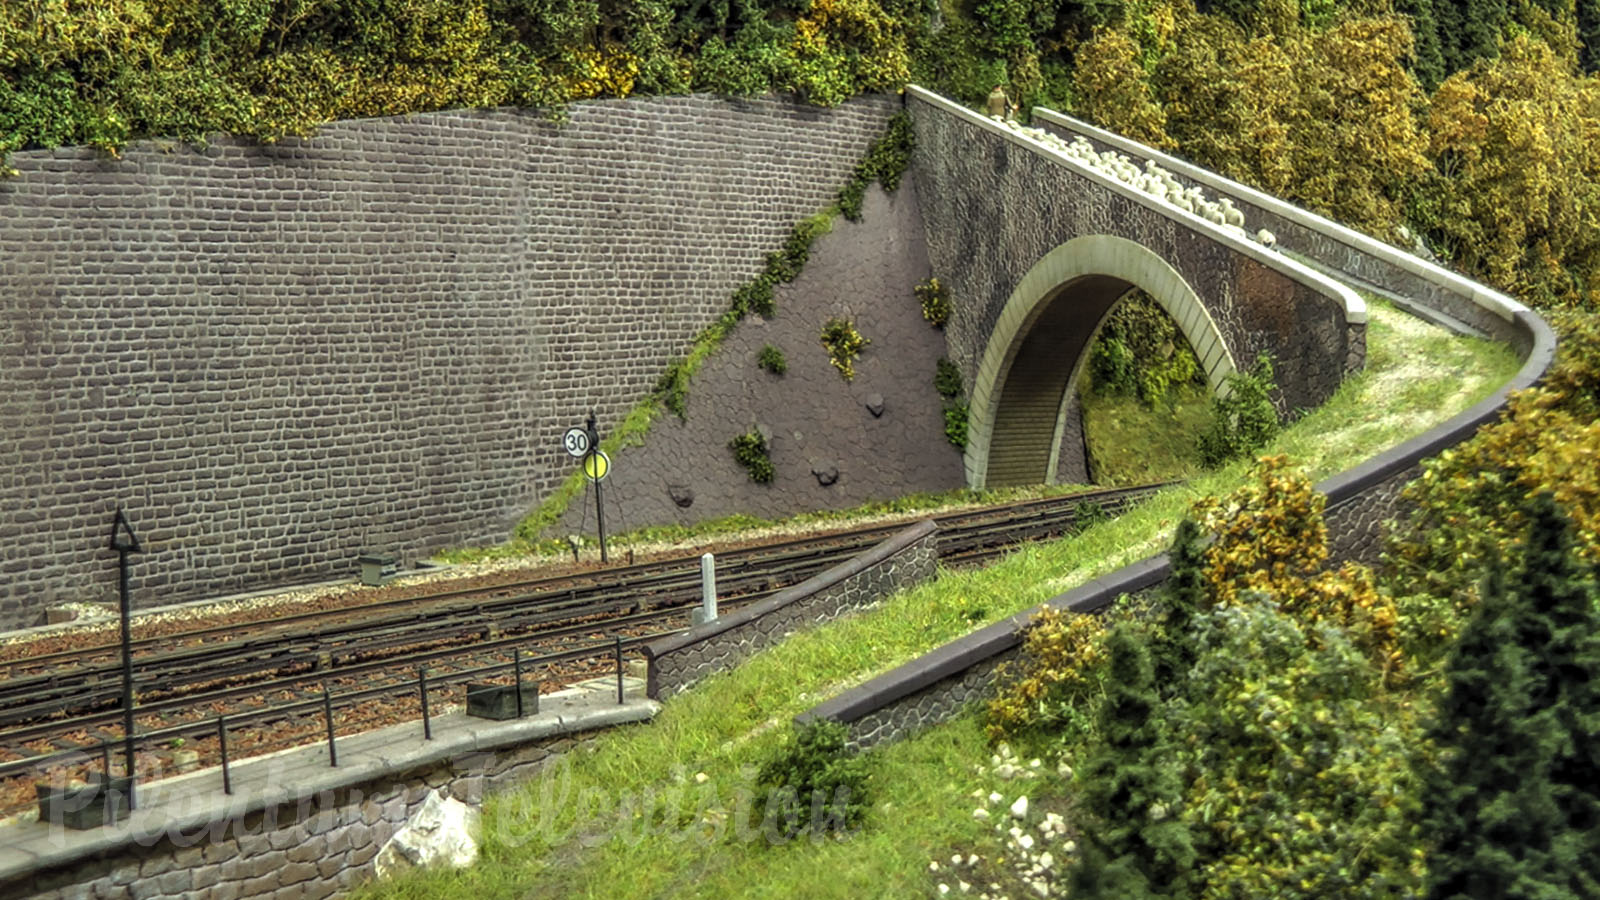 One of the nearly realistic French model railroad layouts - HO scale model trains of SNCF in France